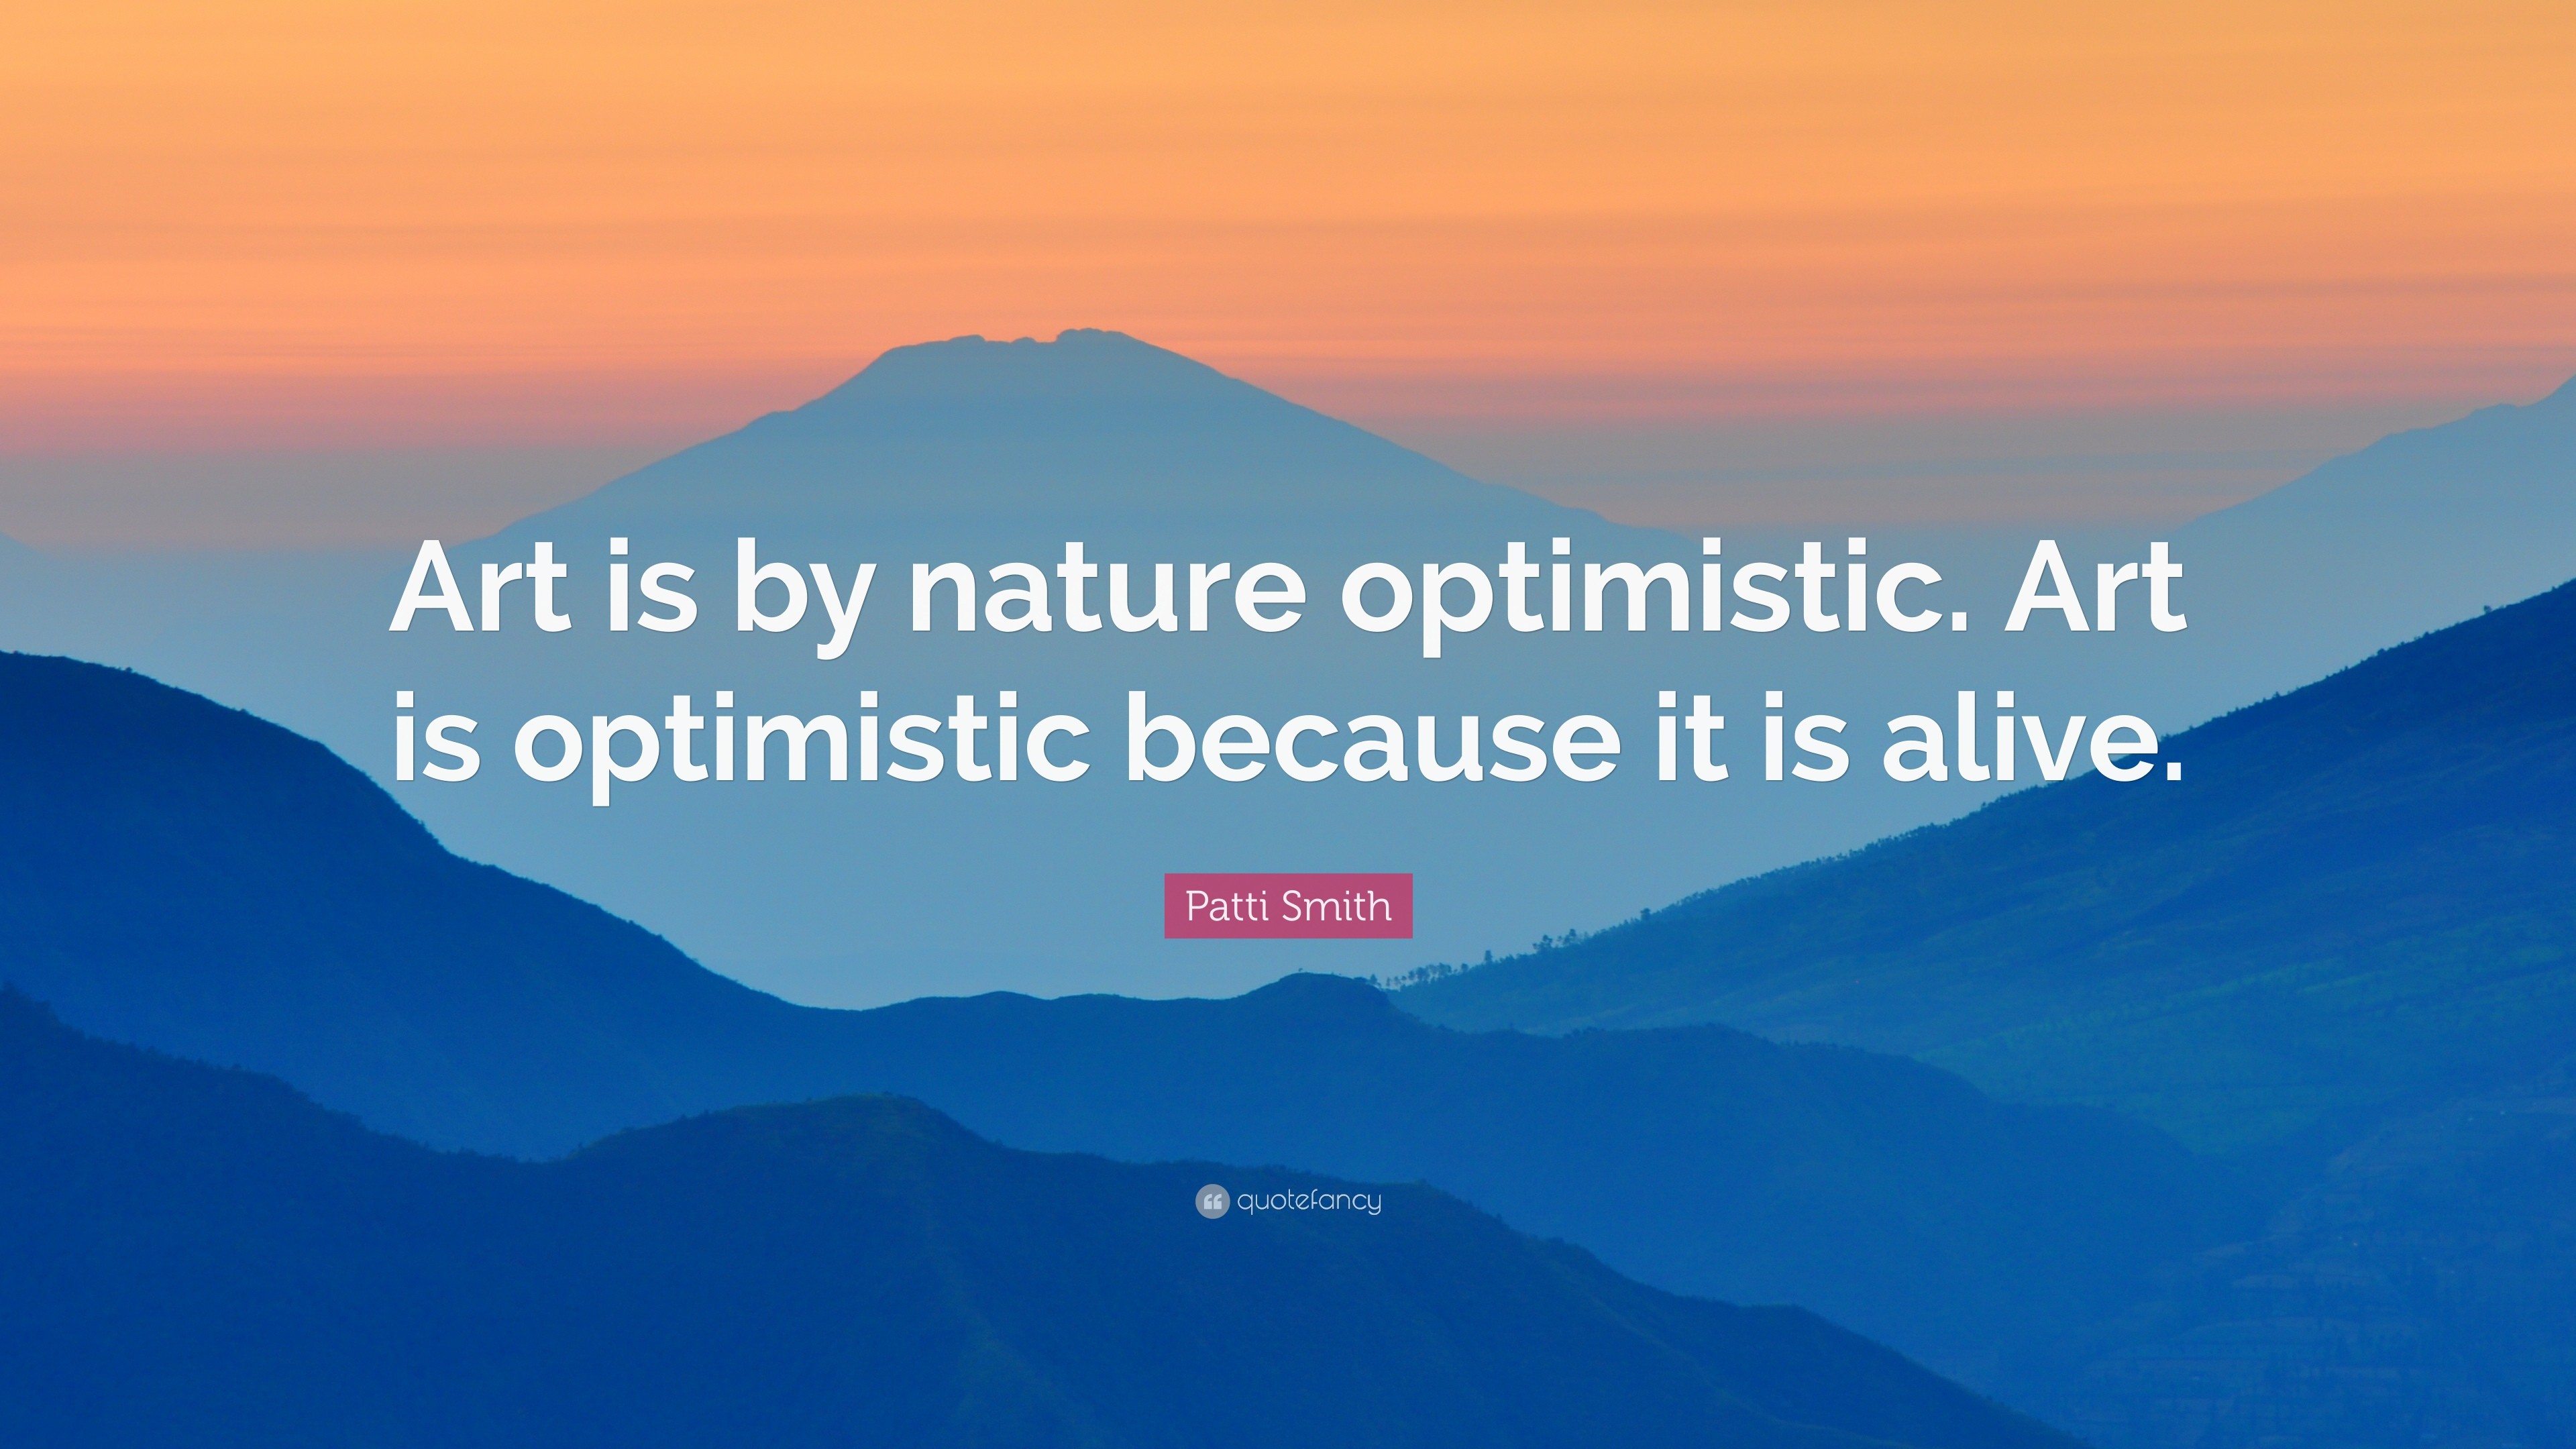 3840x2160 Patti Smith Quote: “Art is by nature optimistic. Art is optimistic because  it